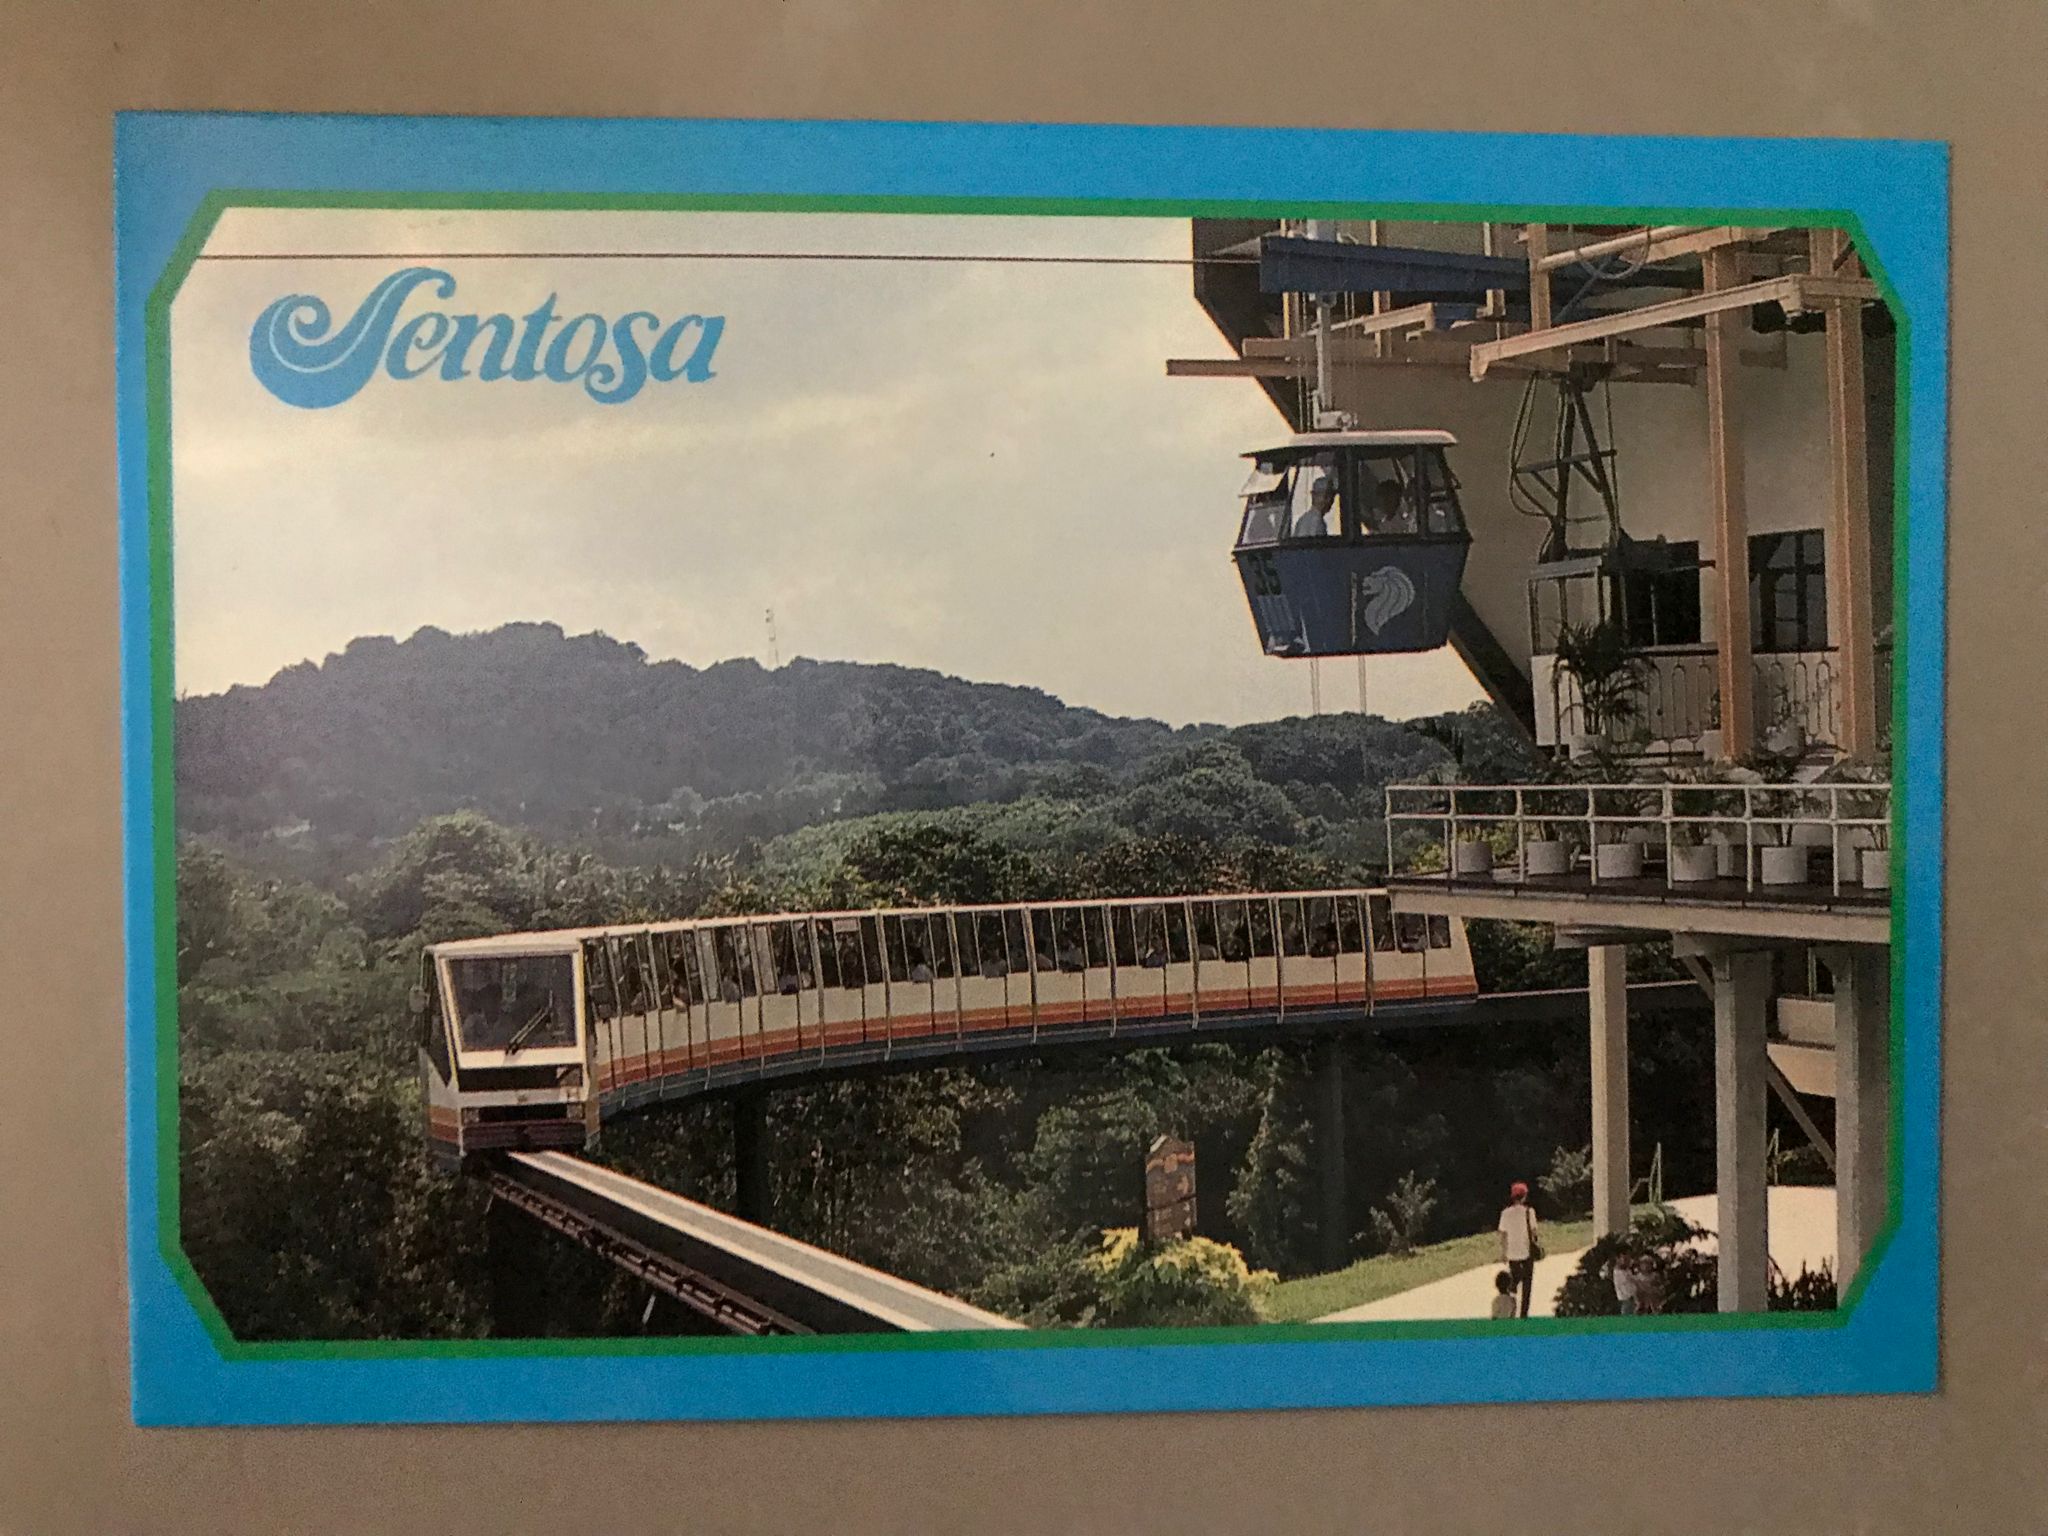 Cable Car And Monorail In Sentosa Postcard